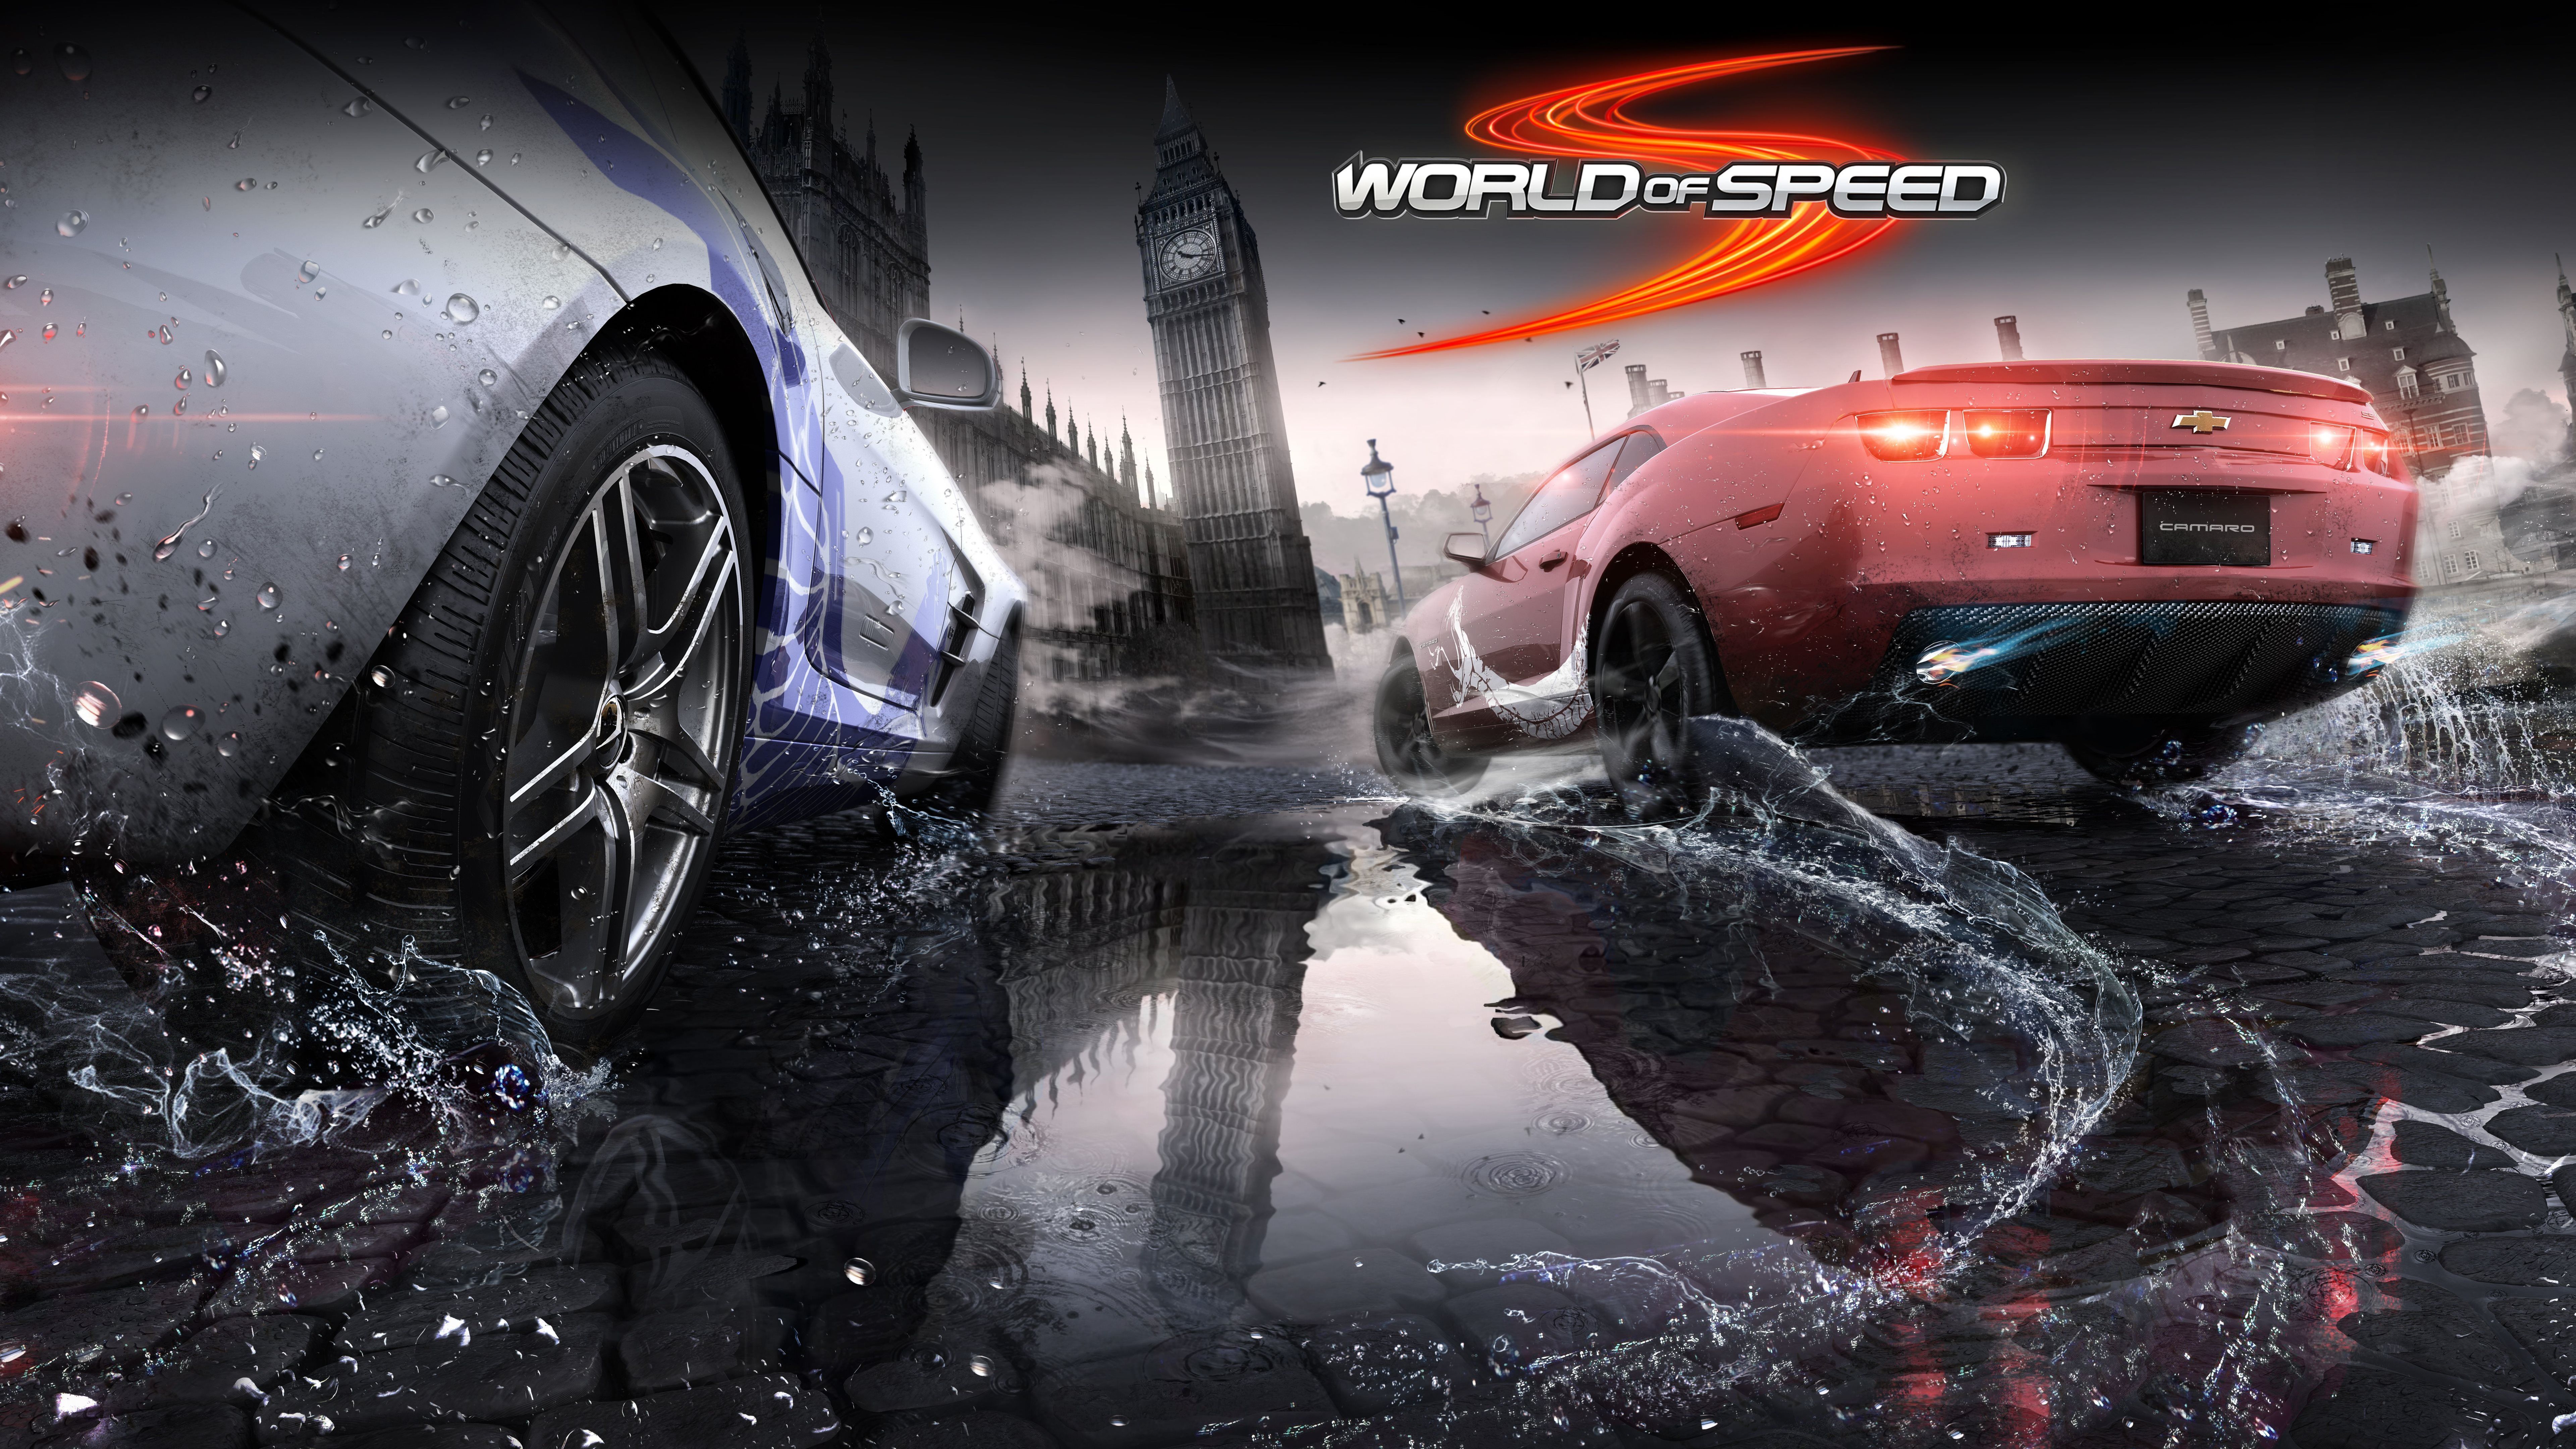 World of Speed Wallpapers HD Backgrounds